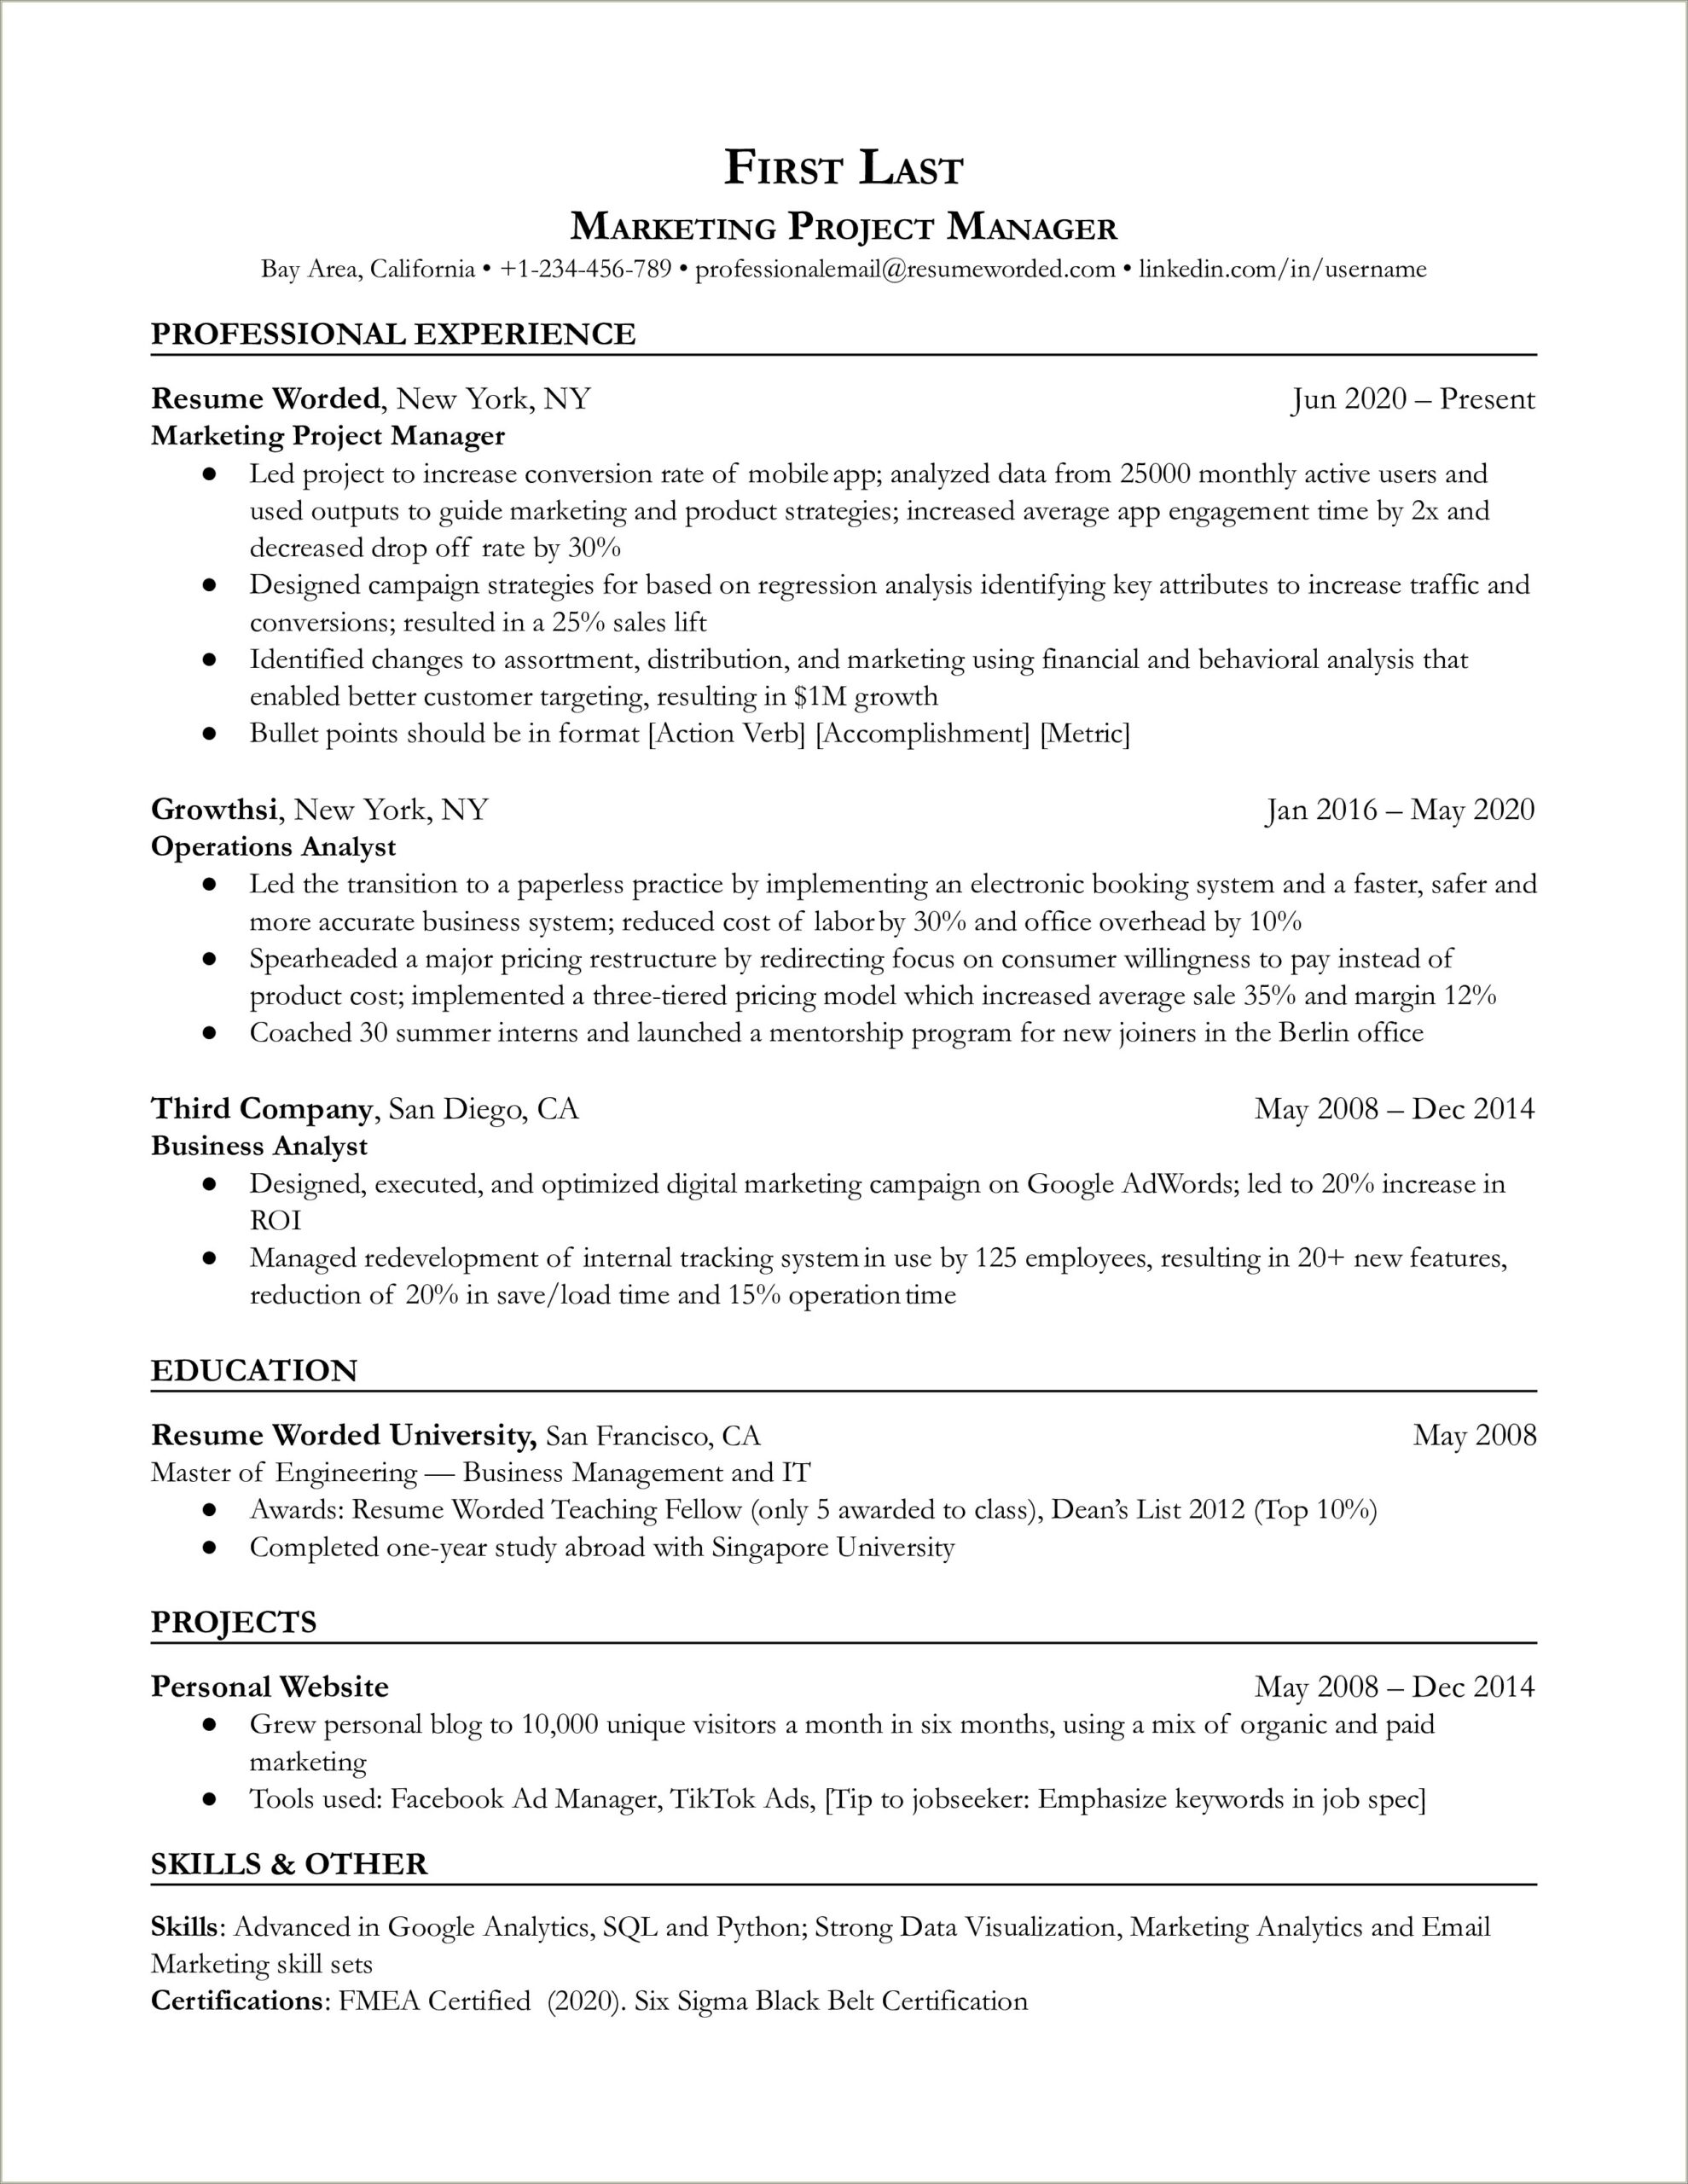 Entry Level Project Manager Resume Summary